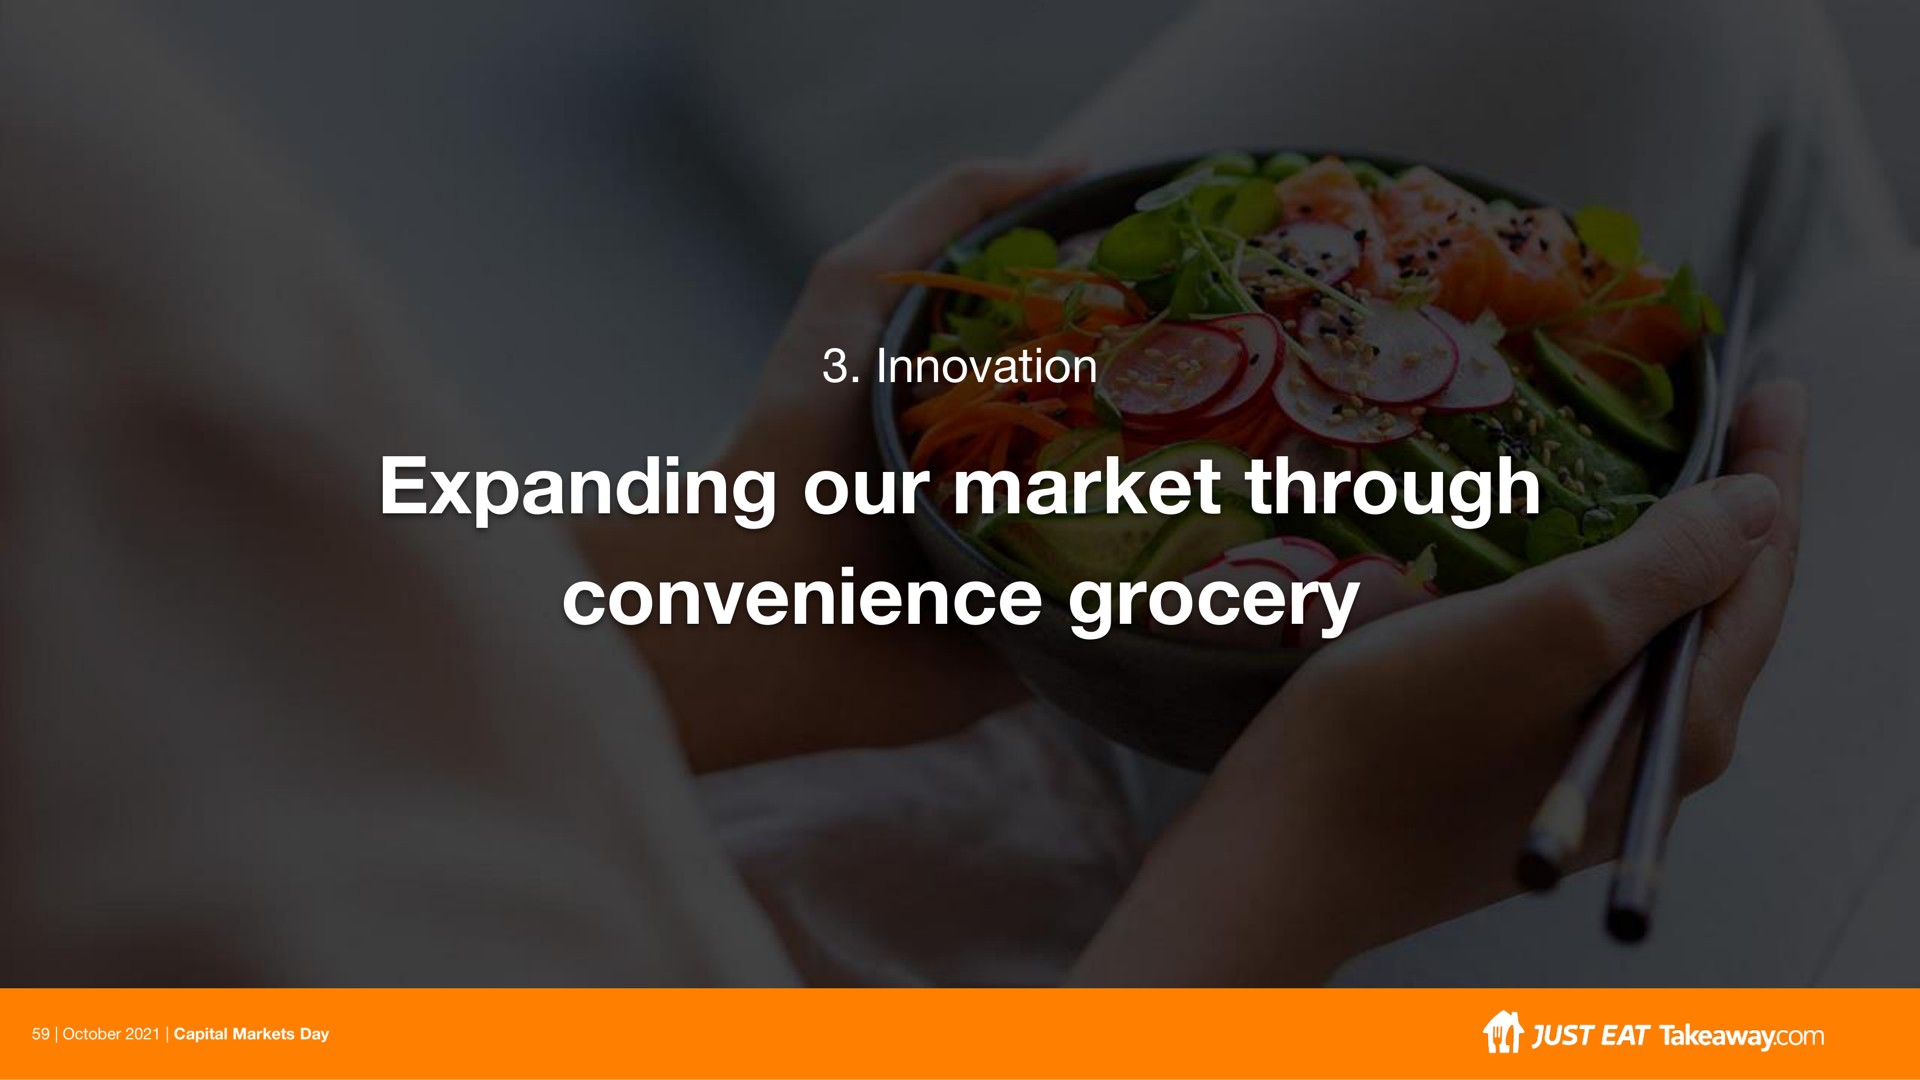 innovation expanding our market through convenience grocery | Just Eat Takeaway.com